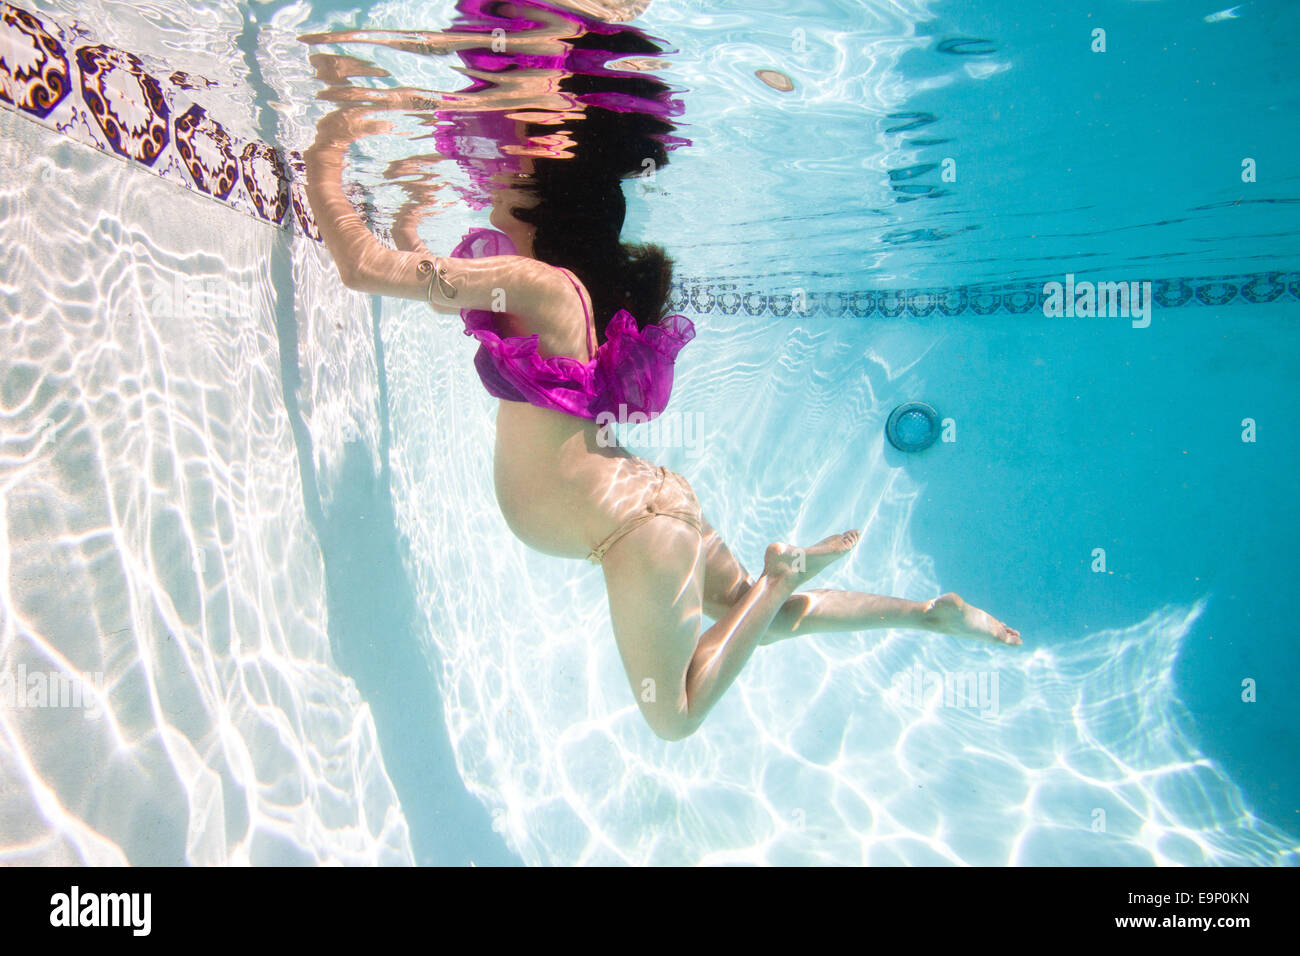 Pregnant woman going for a swim in her pool for exercise. Stock Photo